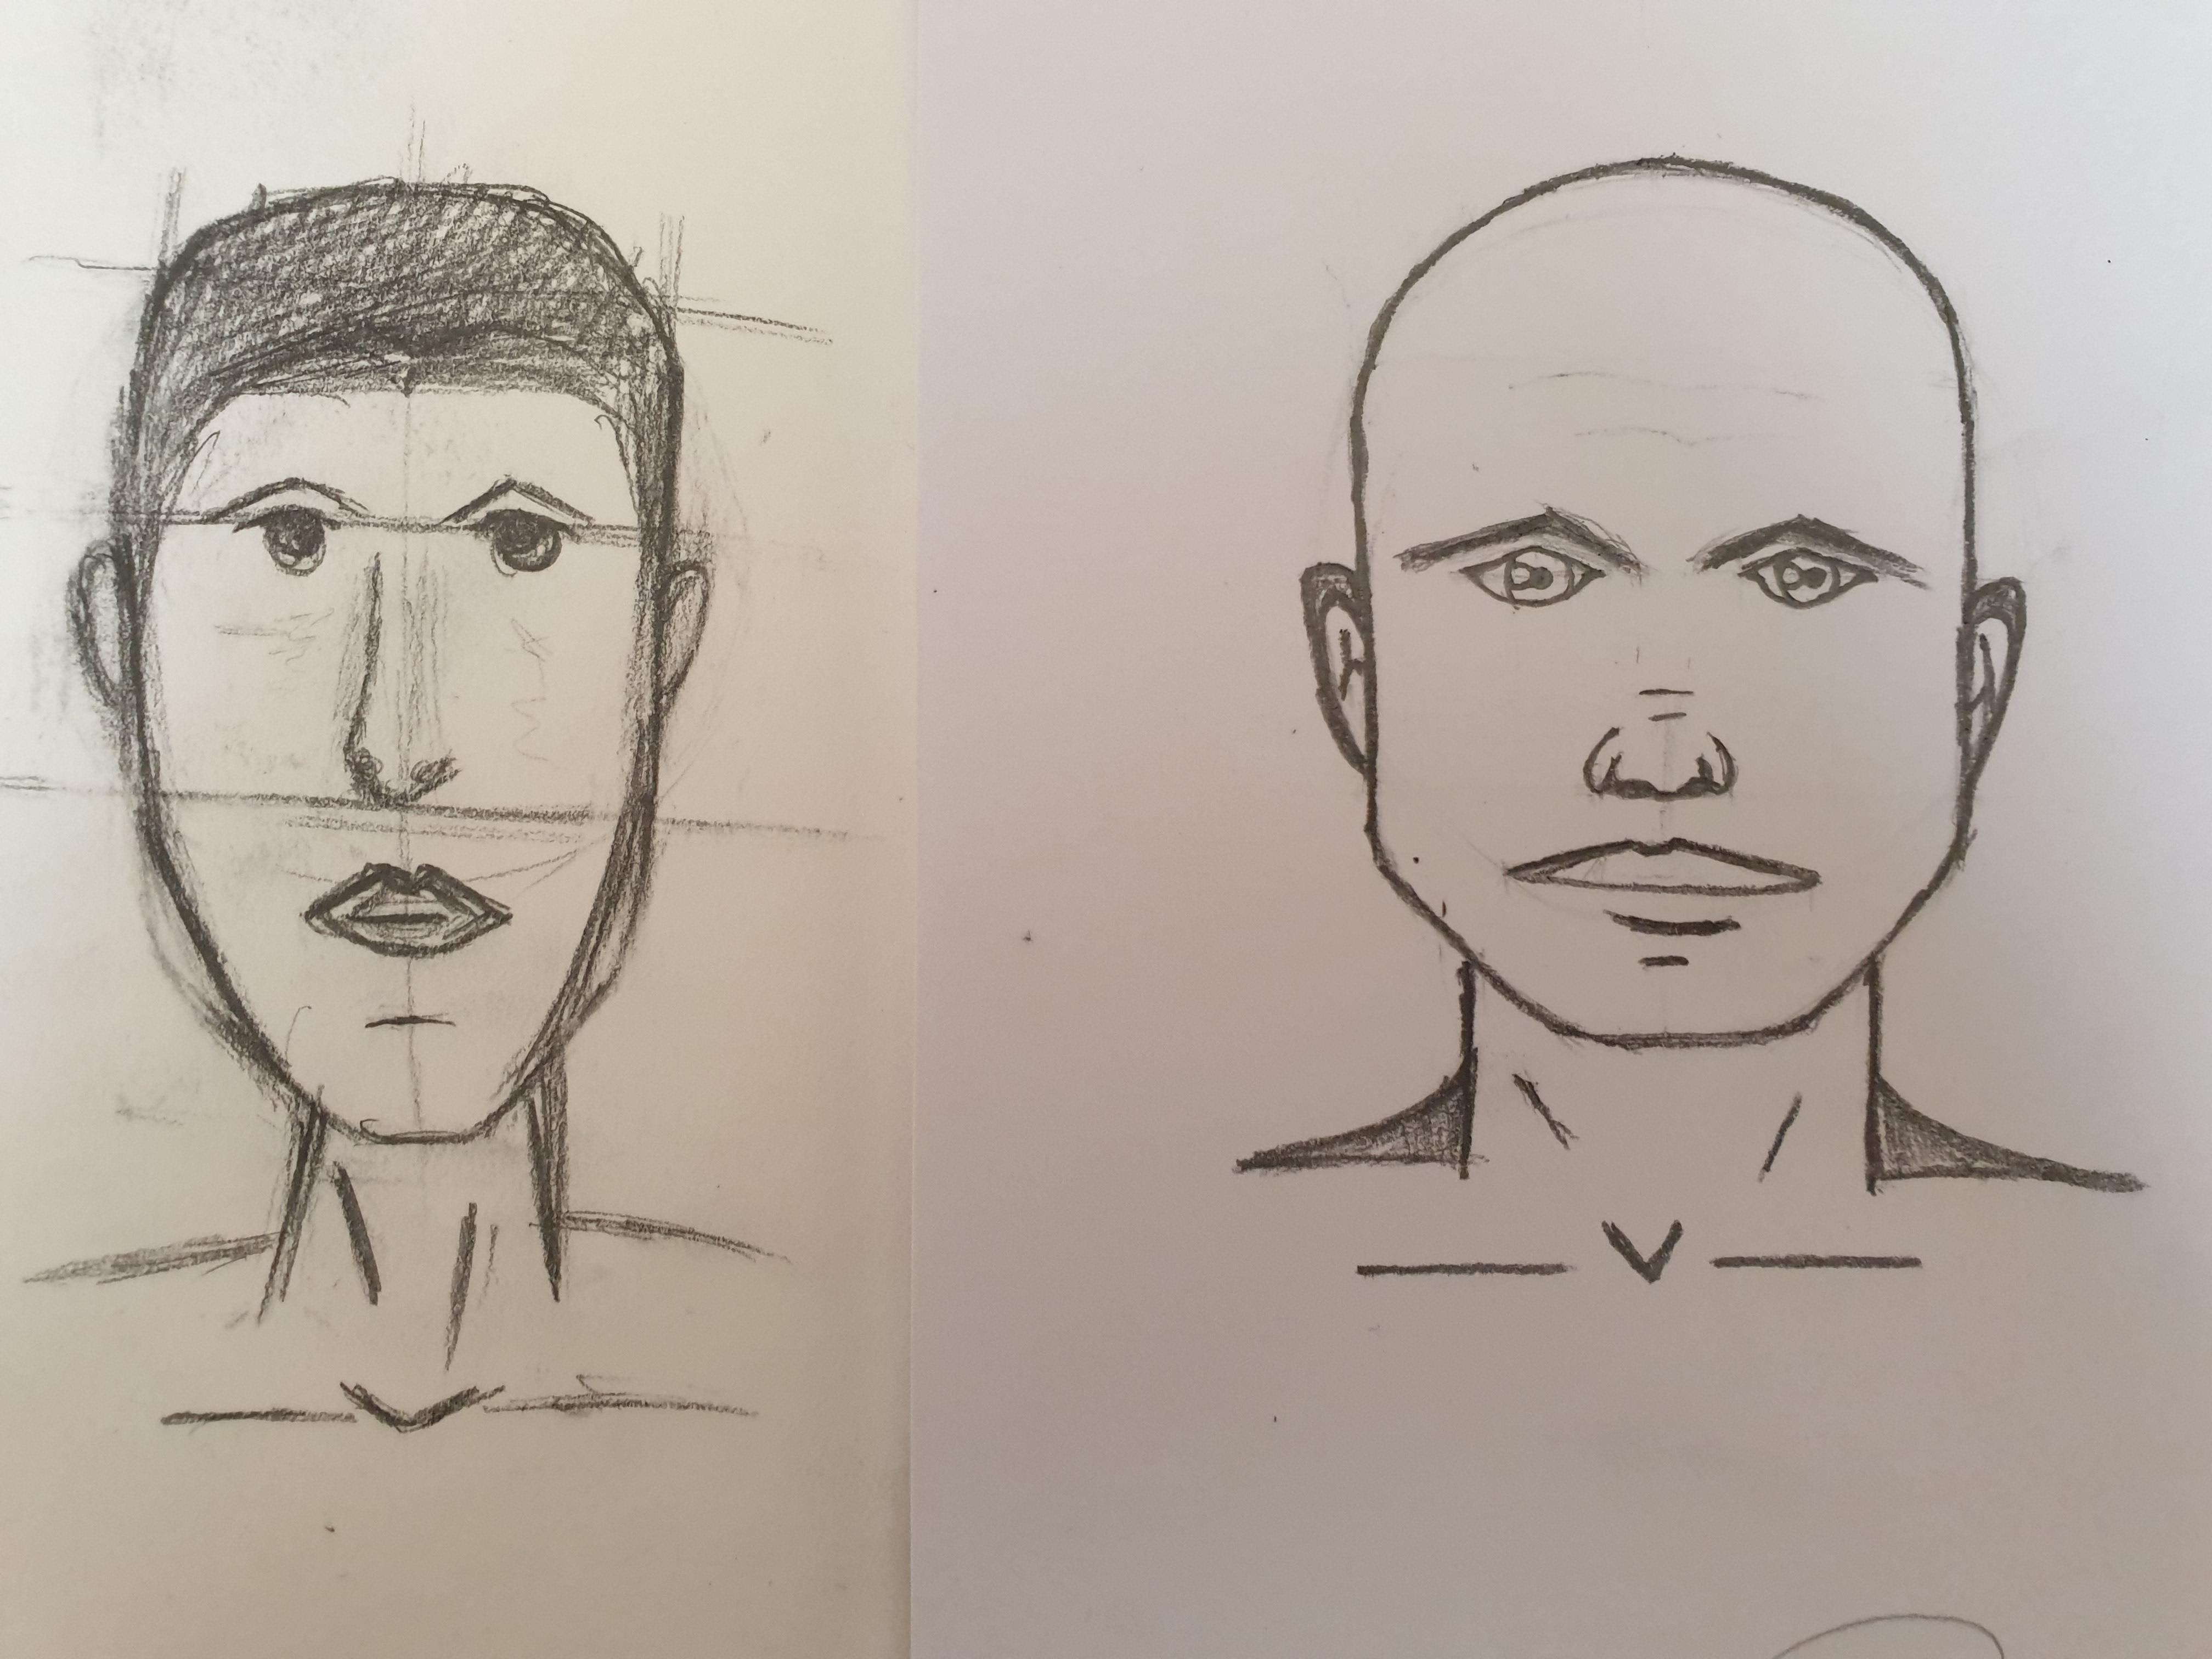 Been drawing for 3 days. On the left is me teaching myself. The right